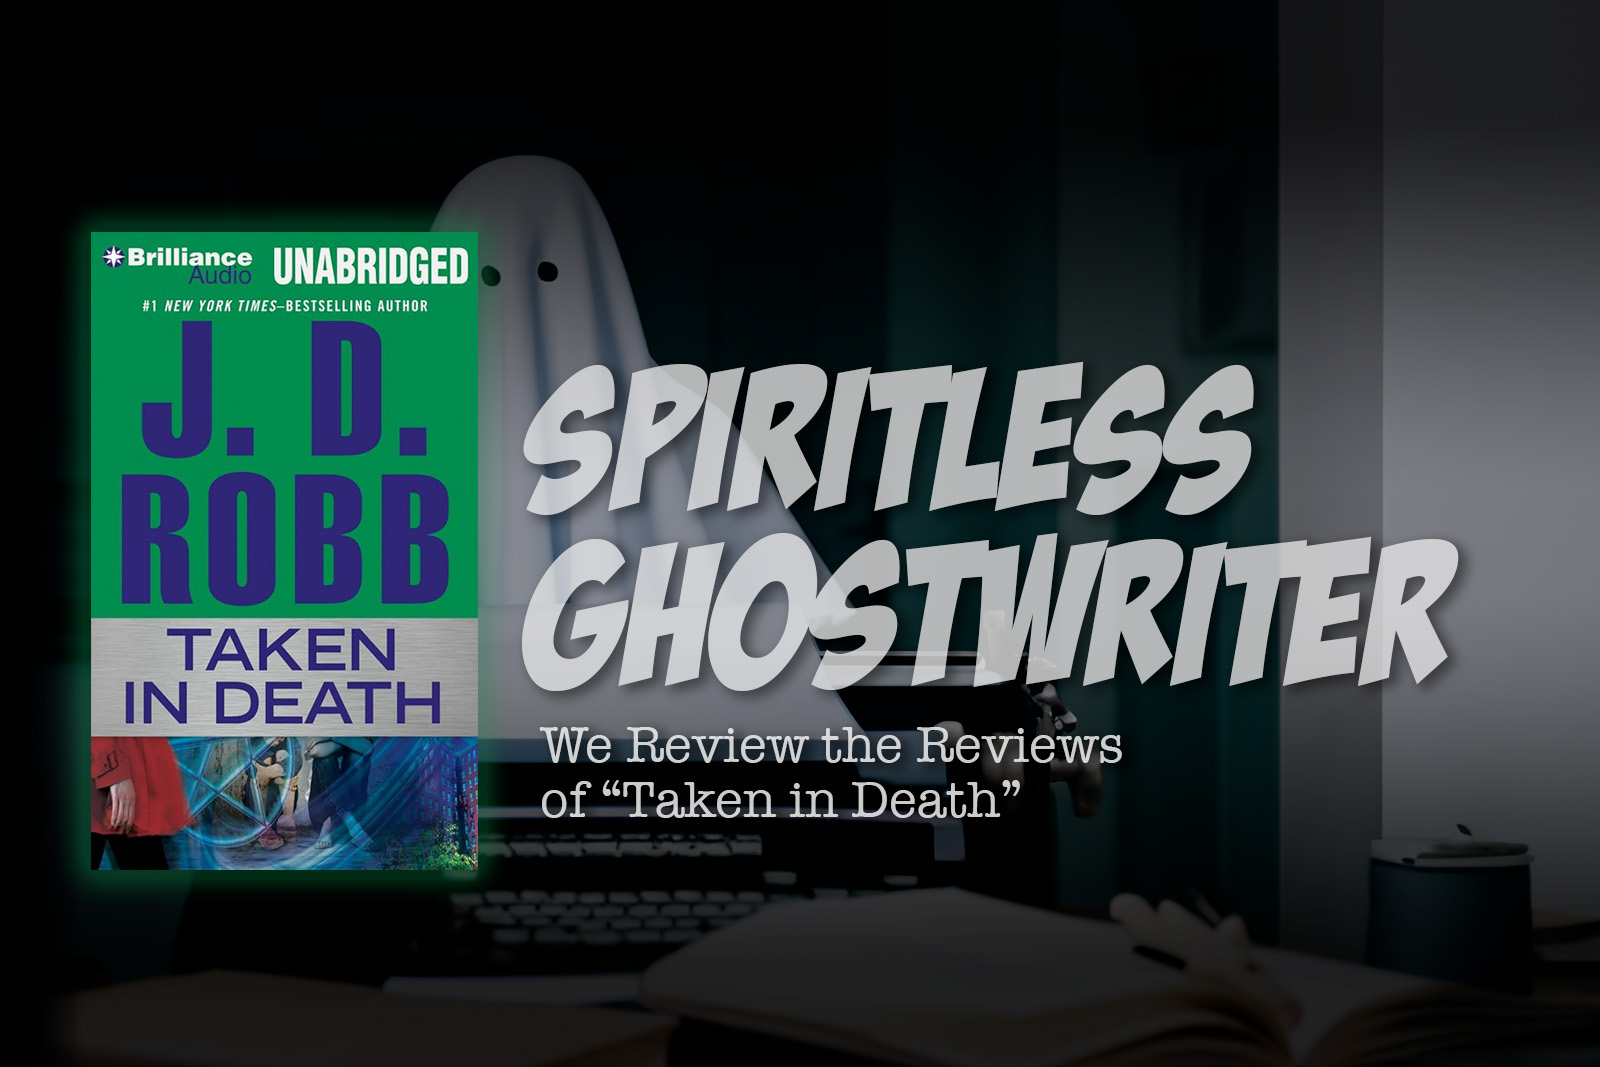 Spiritless Ghostwriter: We Review the Reviews of “Taken in Death”